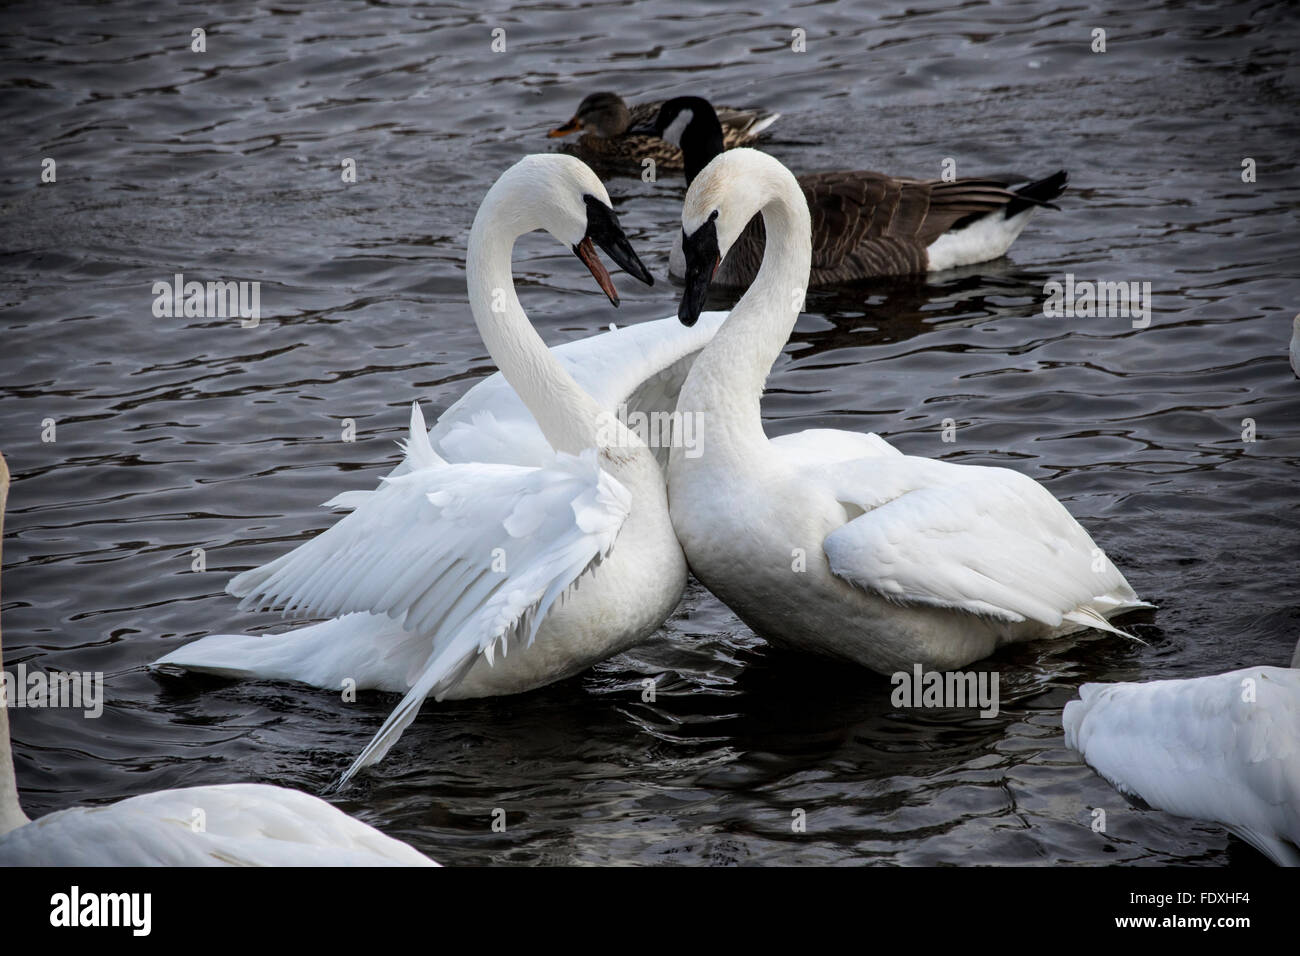 Trumpeter Swans face off in a lively confrontation at Swan Park, Monticello, MN, USA Stock Photo